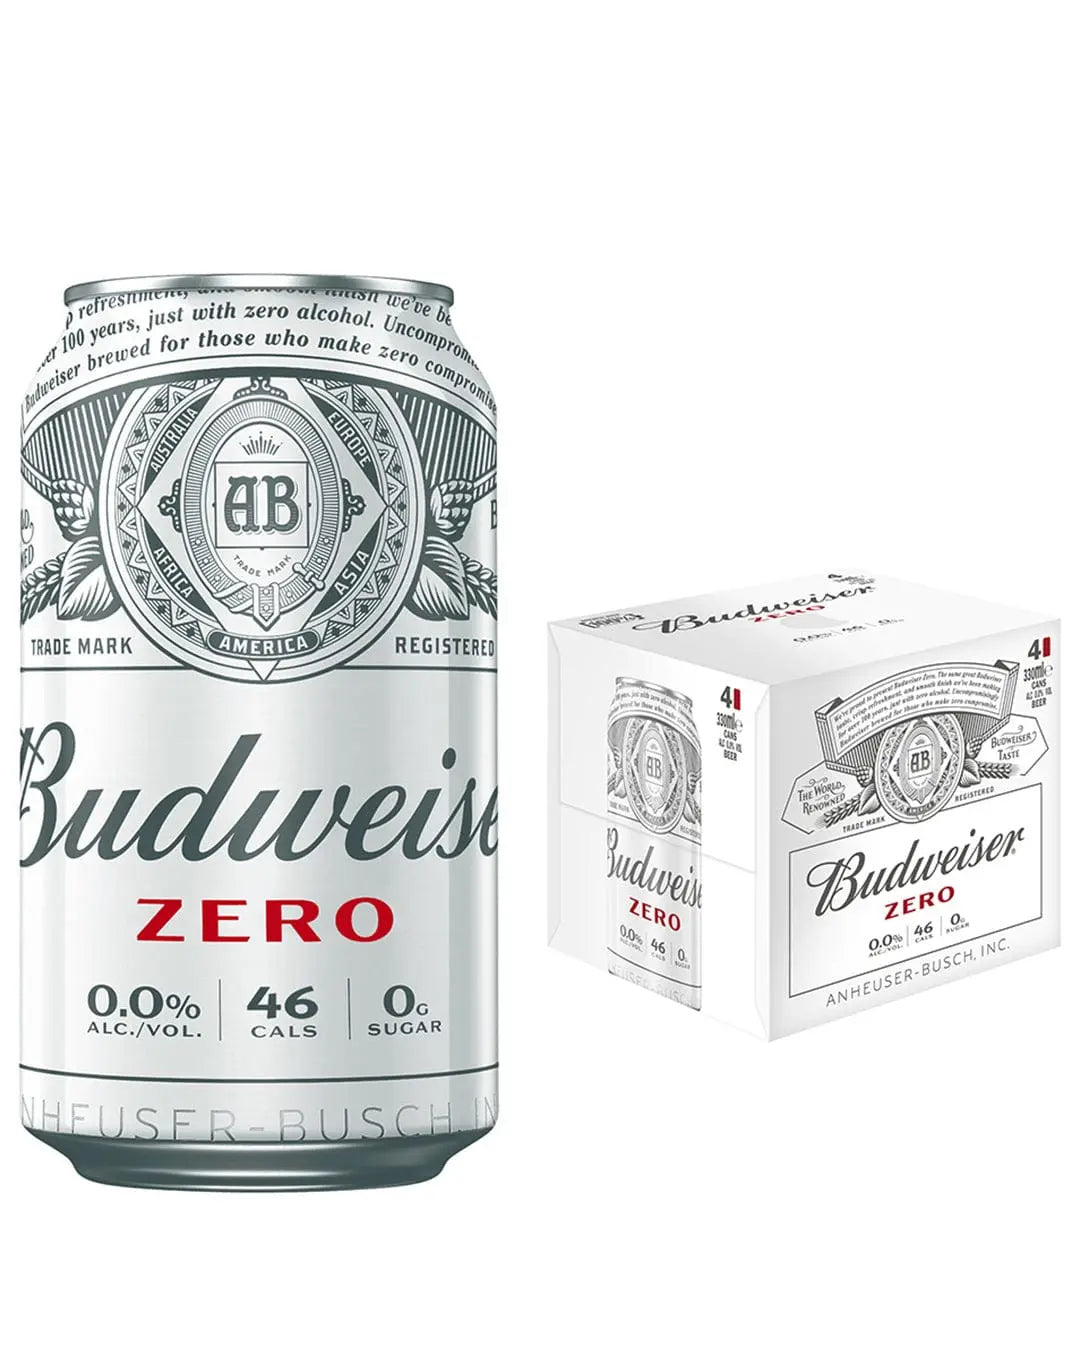 Budweiser 0.0% Alcohol Free Lager Multipack, 24 x 330 ml Beer